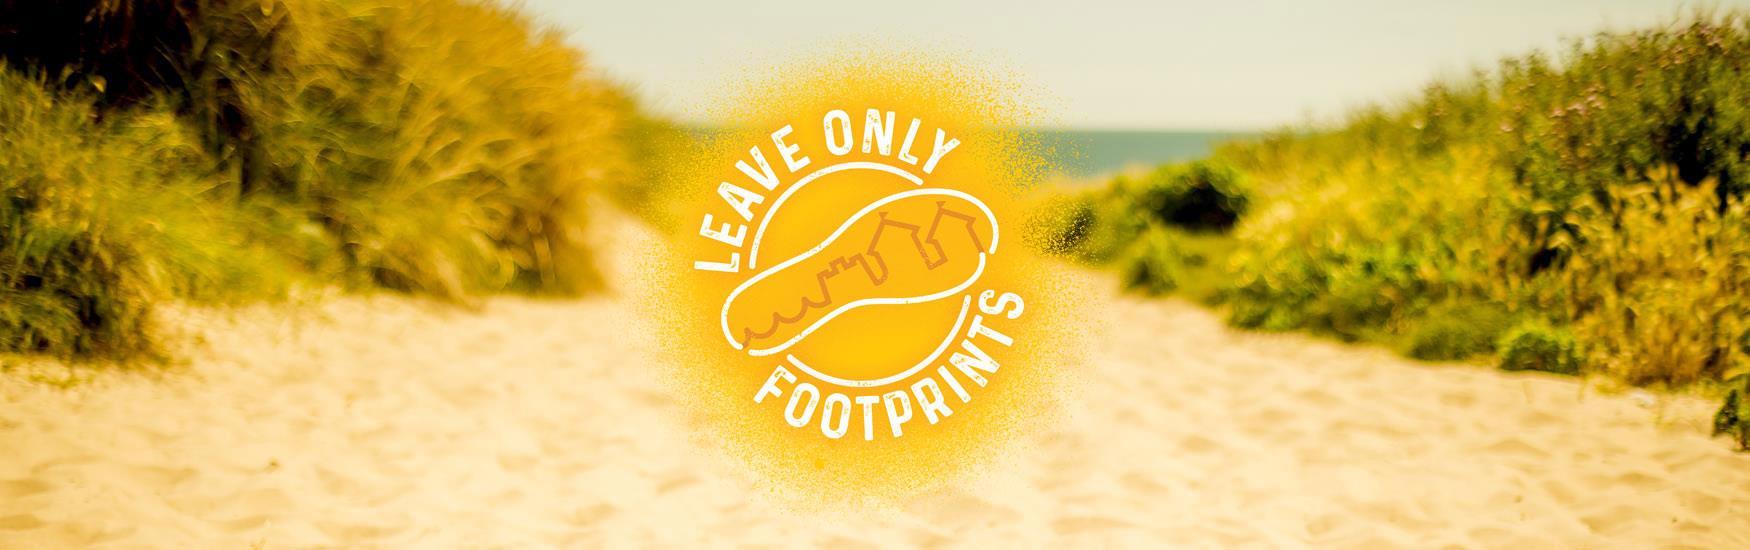 Leave only footprints logo with stunning beach in background